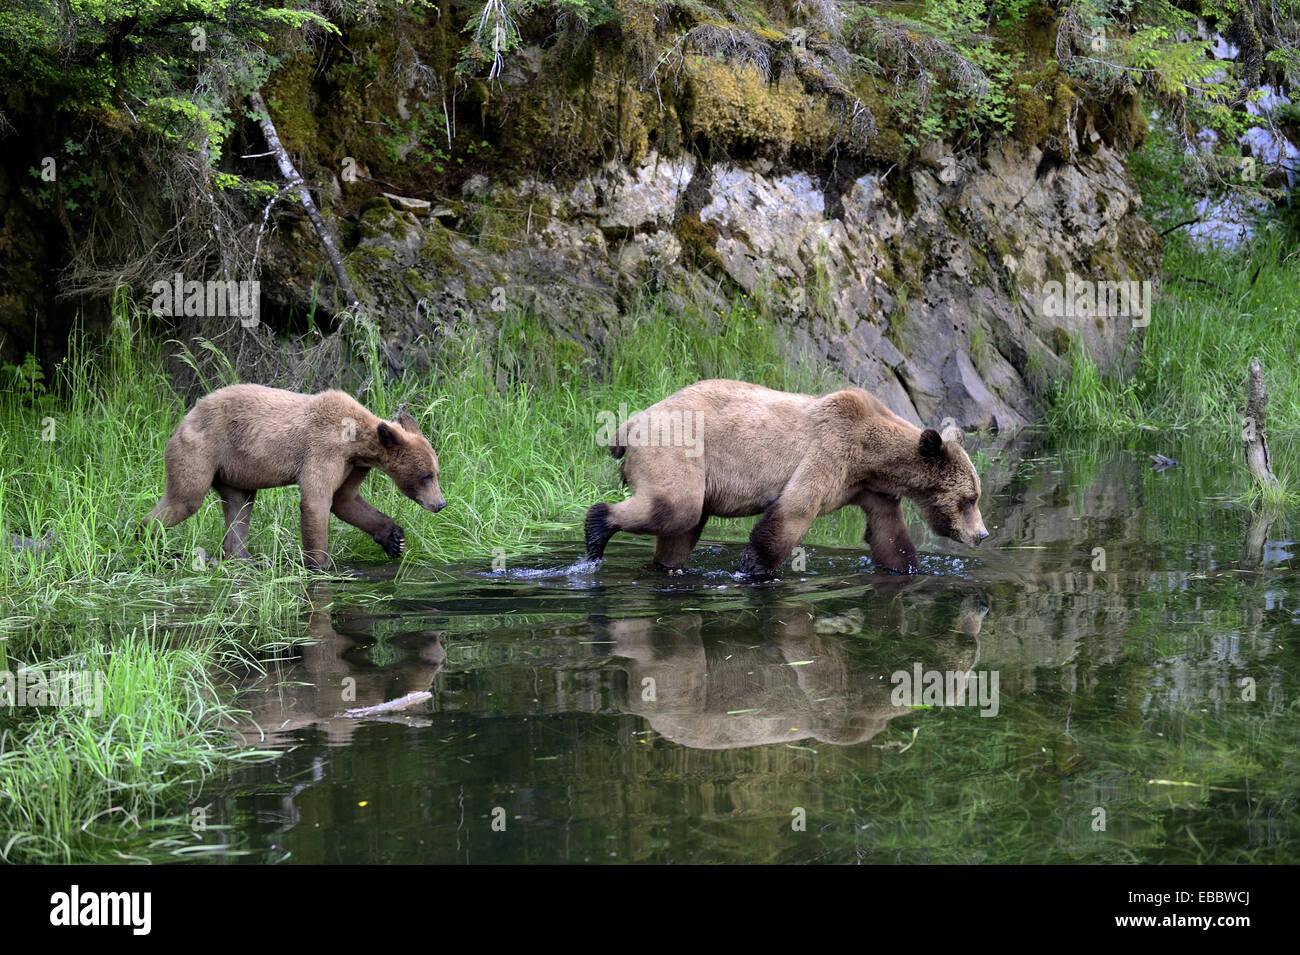 Female grizzly bear (Ursus arctos horribilis) crossing water, followed by her cub, Khutzeymateen Grizzly Bear Sanctuary, Stock Photo